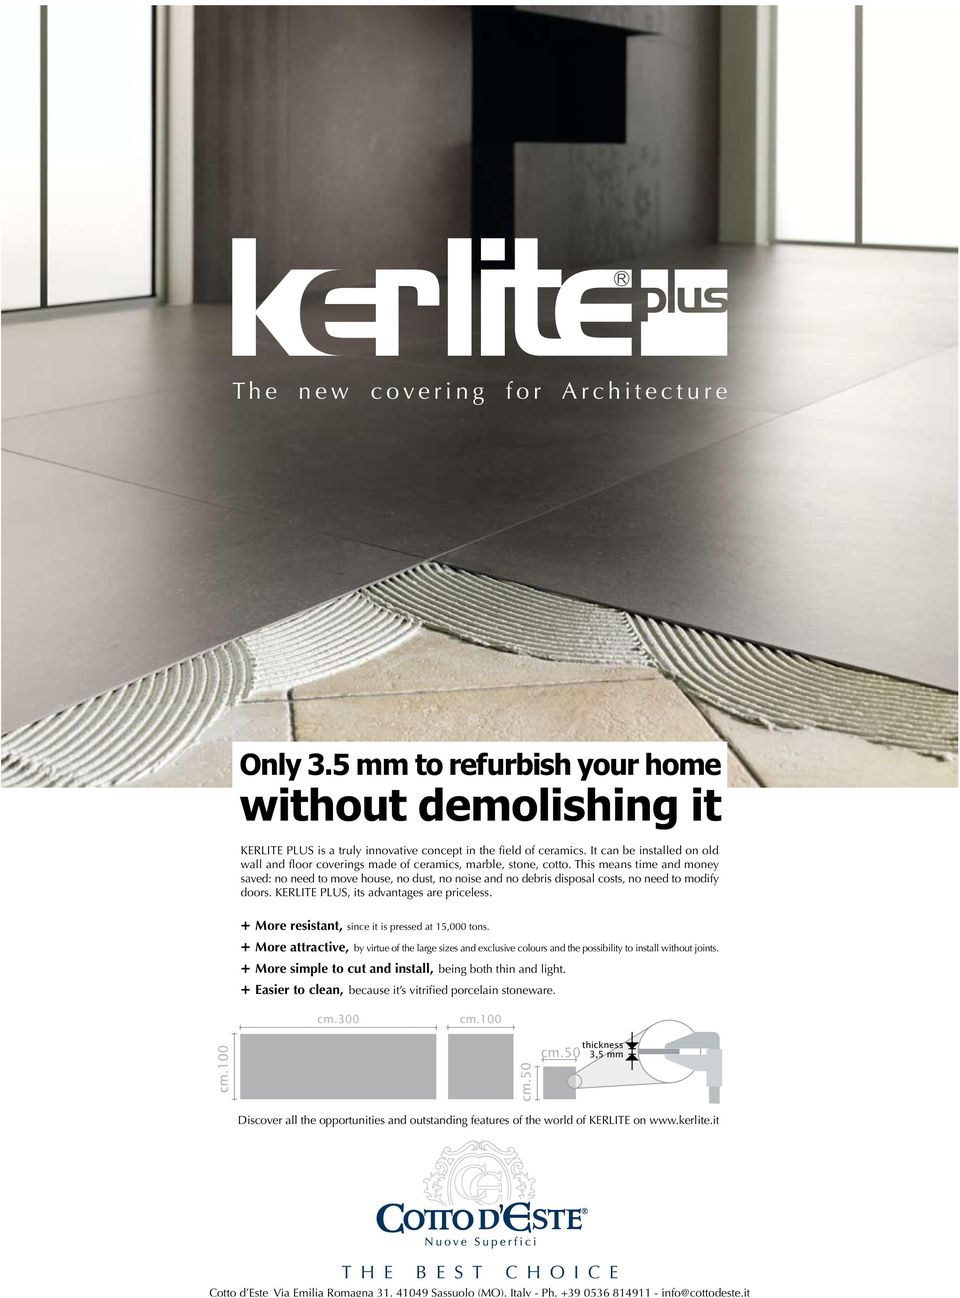 This means time and money saved: no need to move house, no dust, no noise and no debris disposal costs, no need to modify doors. KERLITE PLUS, its advantages are priceless.